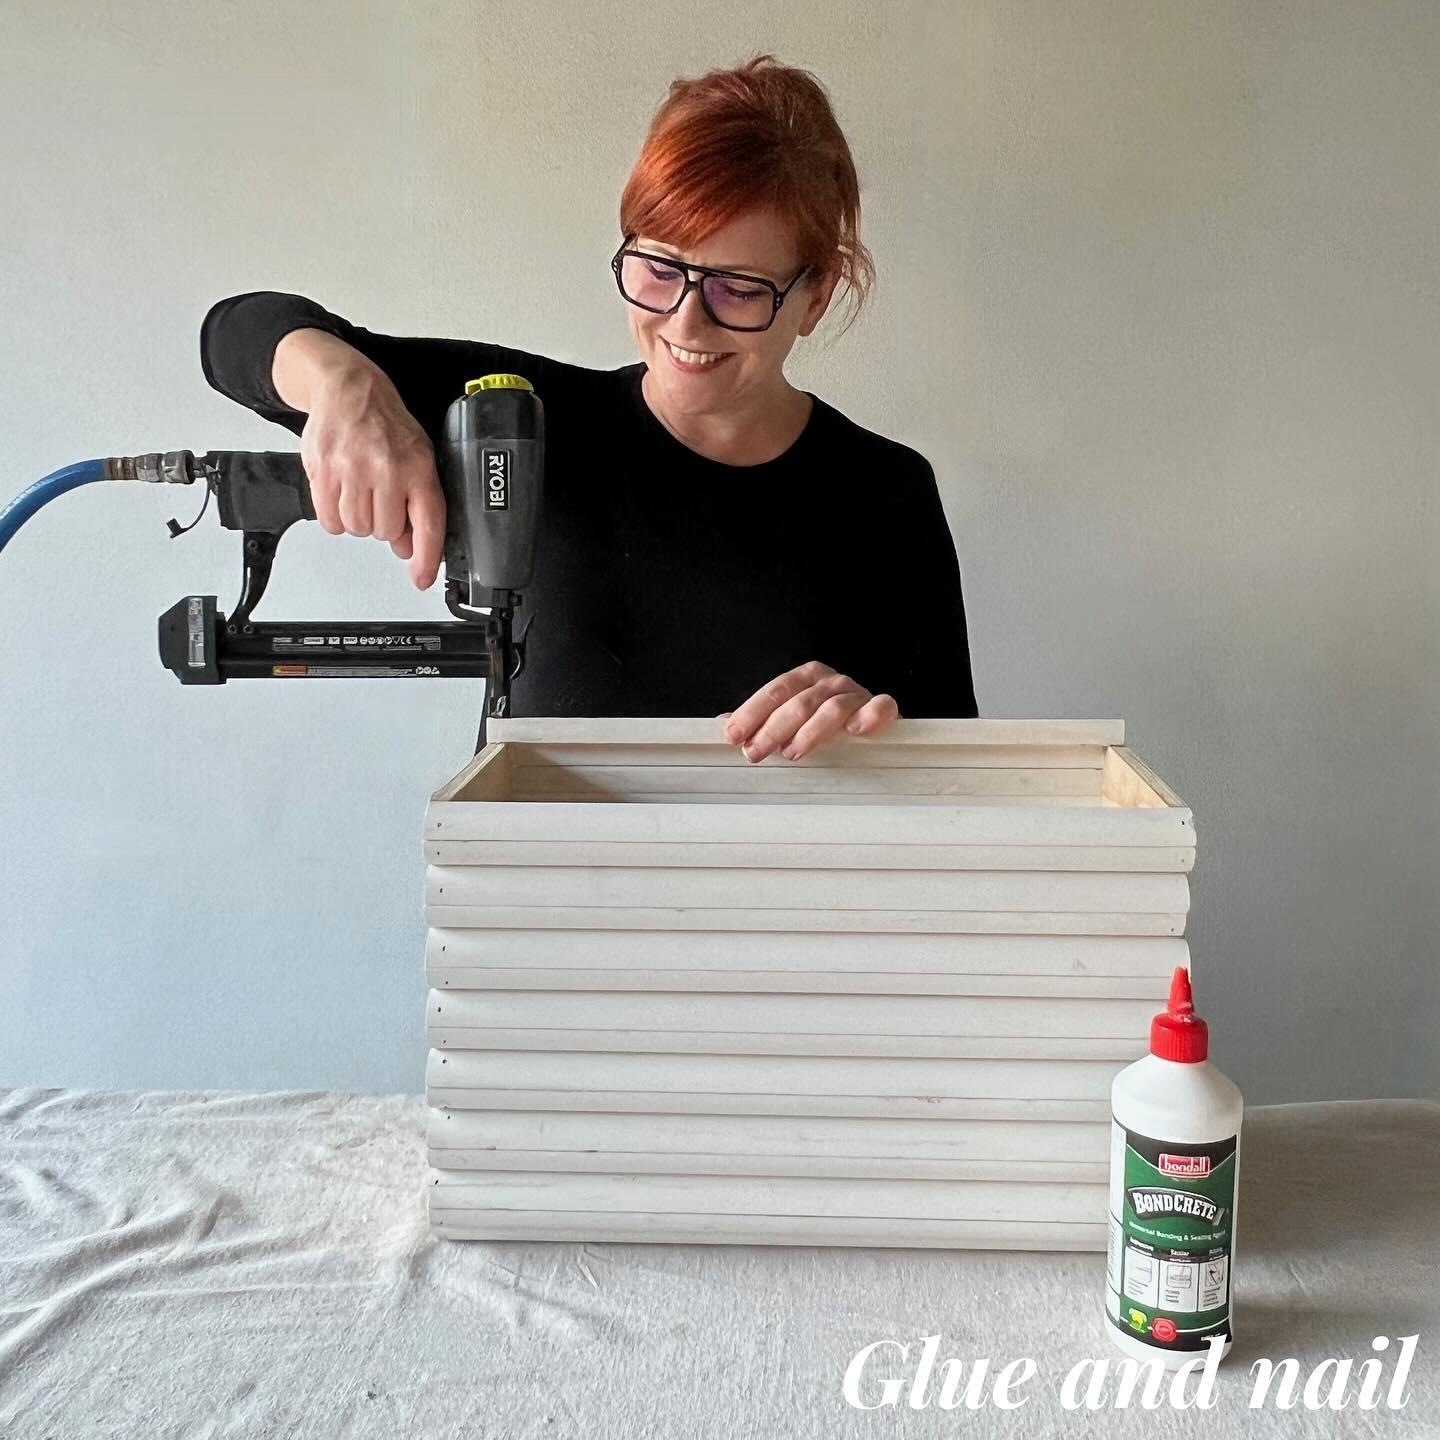 Want to whip up a cute scalloped table like this one? ⁠
Swipe to see how I used porta_timber quad moulding and a ryobiau nail gun with bondall.au woodworking adhesive.
Yours could be any size, just check the moulding fits along the edges before cutting the base and top.⁠ 
🪚 I also made a pink terrazzo table! Click through my link in profile for the DIY instructions.⁠
⁠
⁠